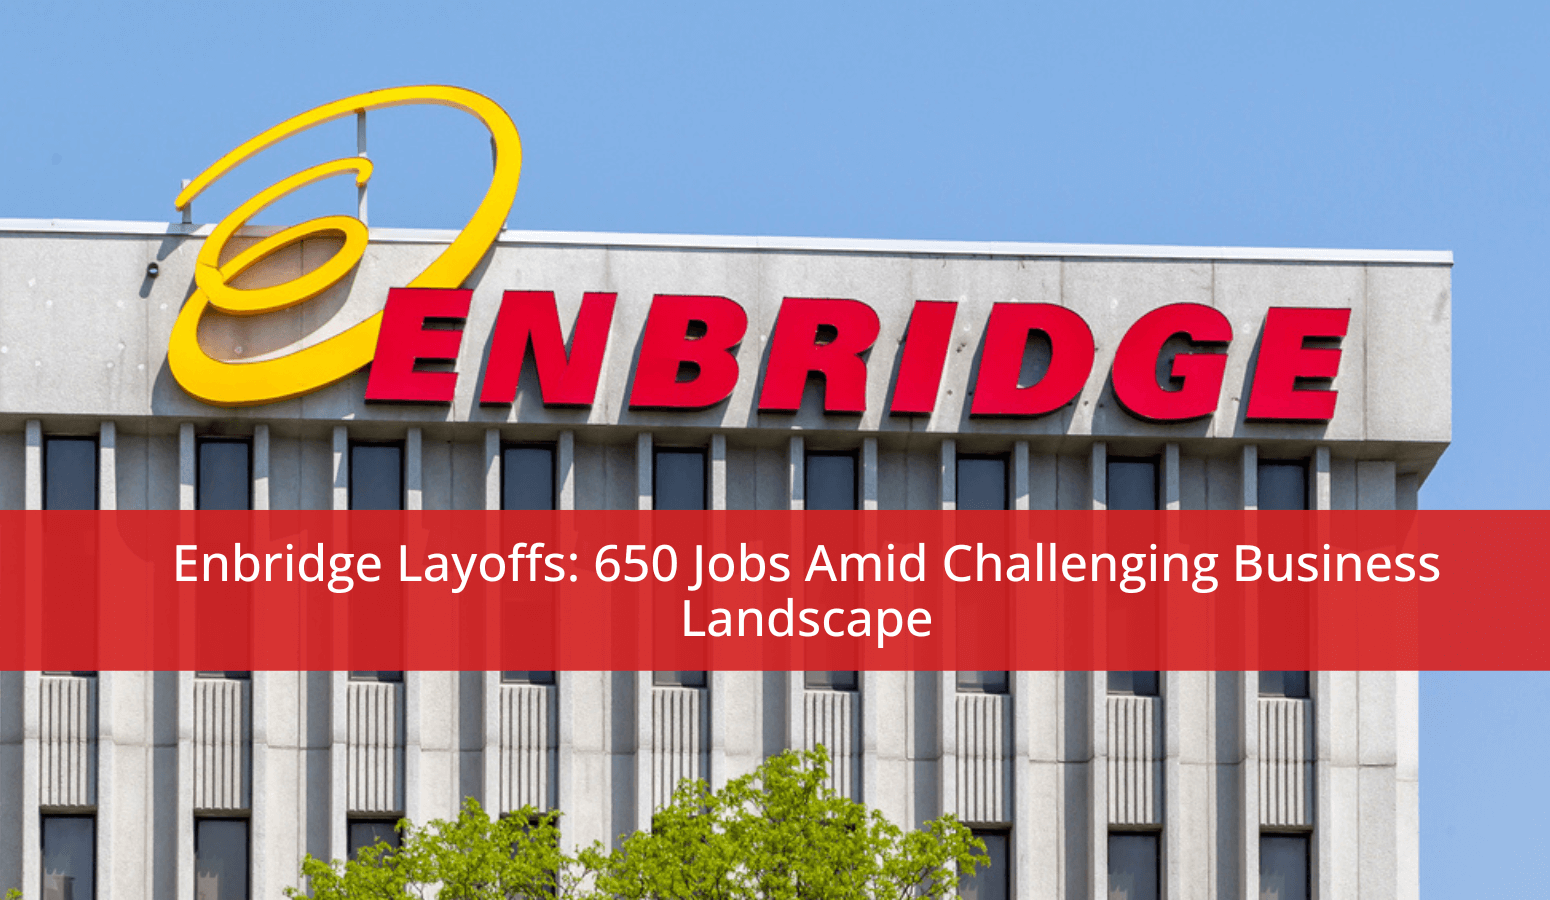 Featured image for “Enbridge Layoffs: 650 Jobs Amid Challenging Business Landscape”